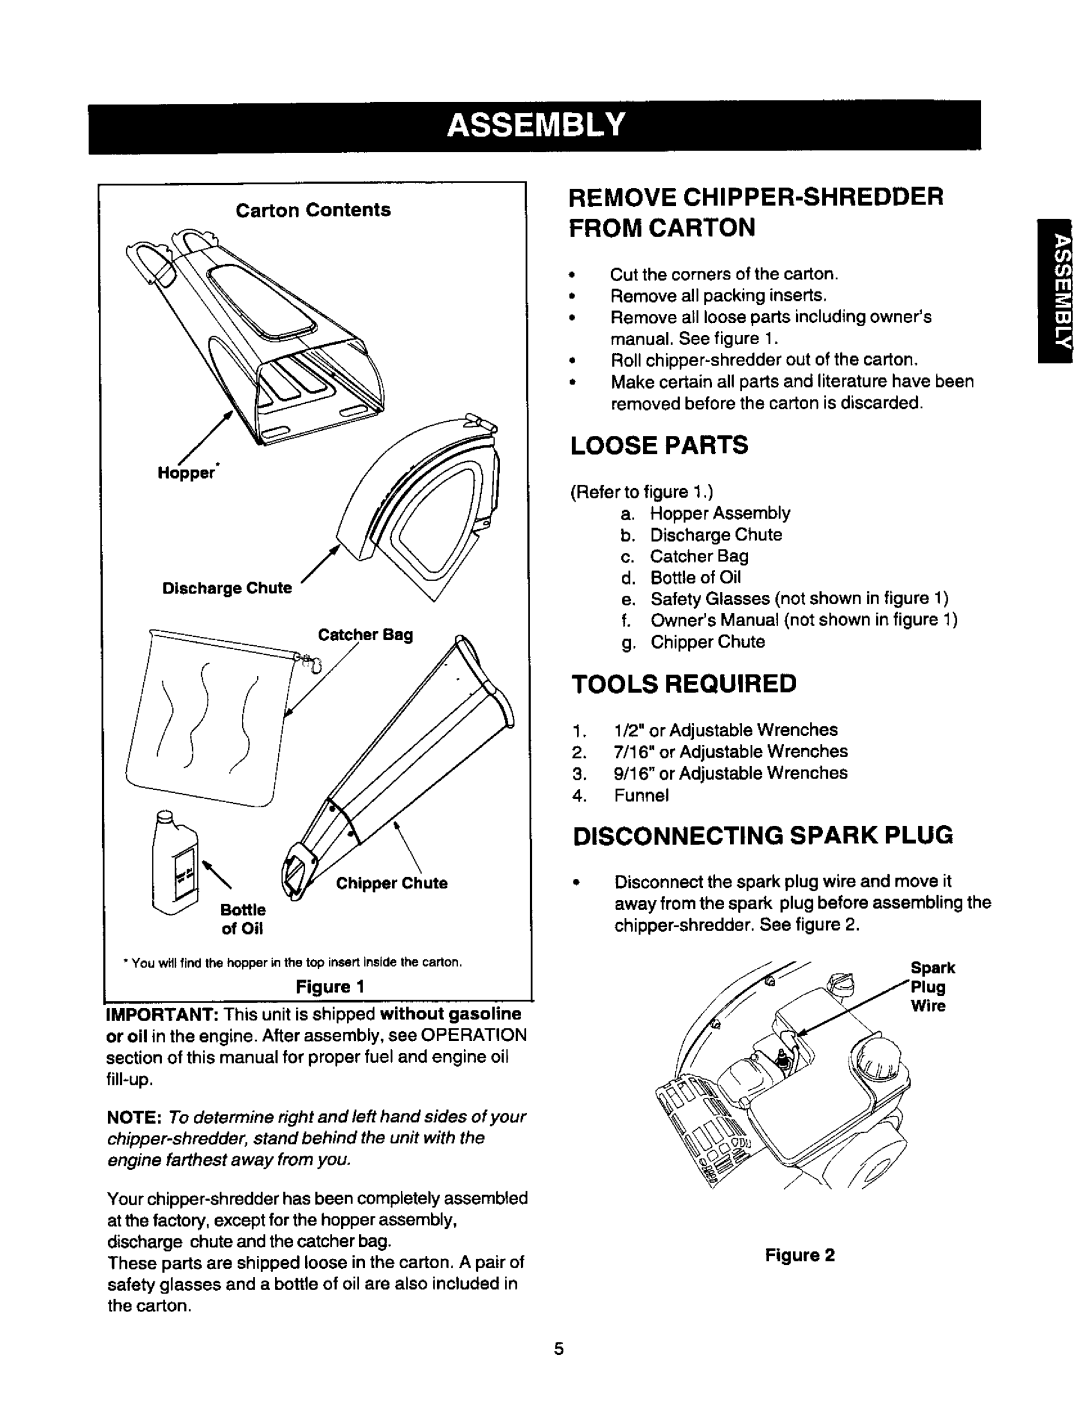 Craftsman 247.775870 Remove Chipper-Shredder, From Carton, Loose Parts, Tools Required, Disconnecting Spark Plug 